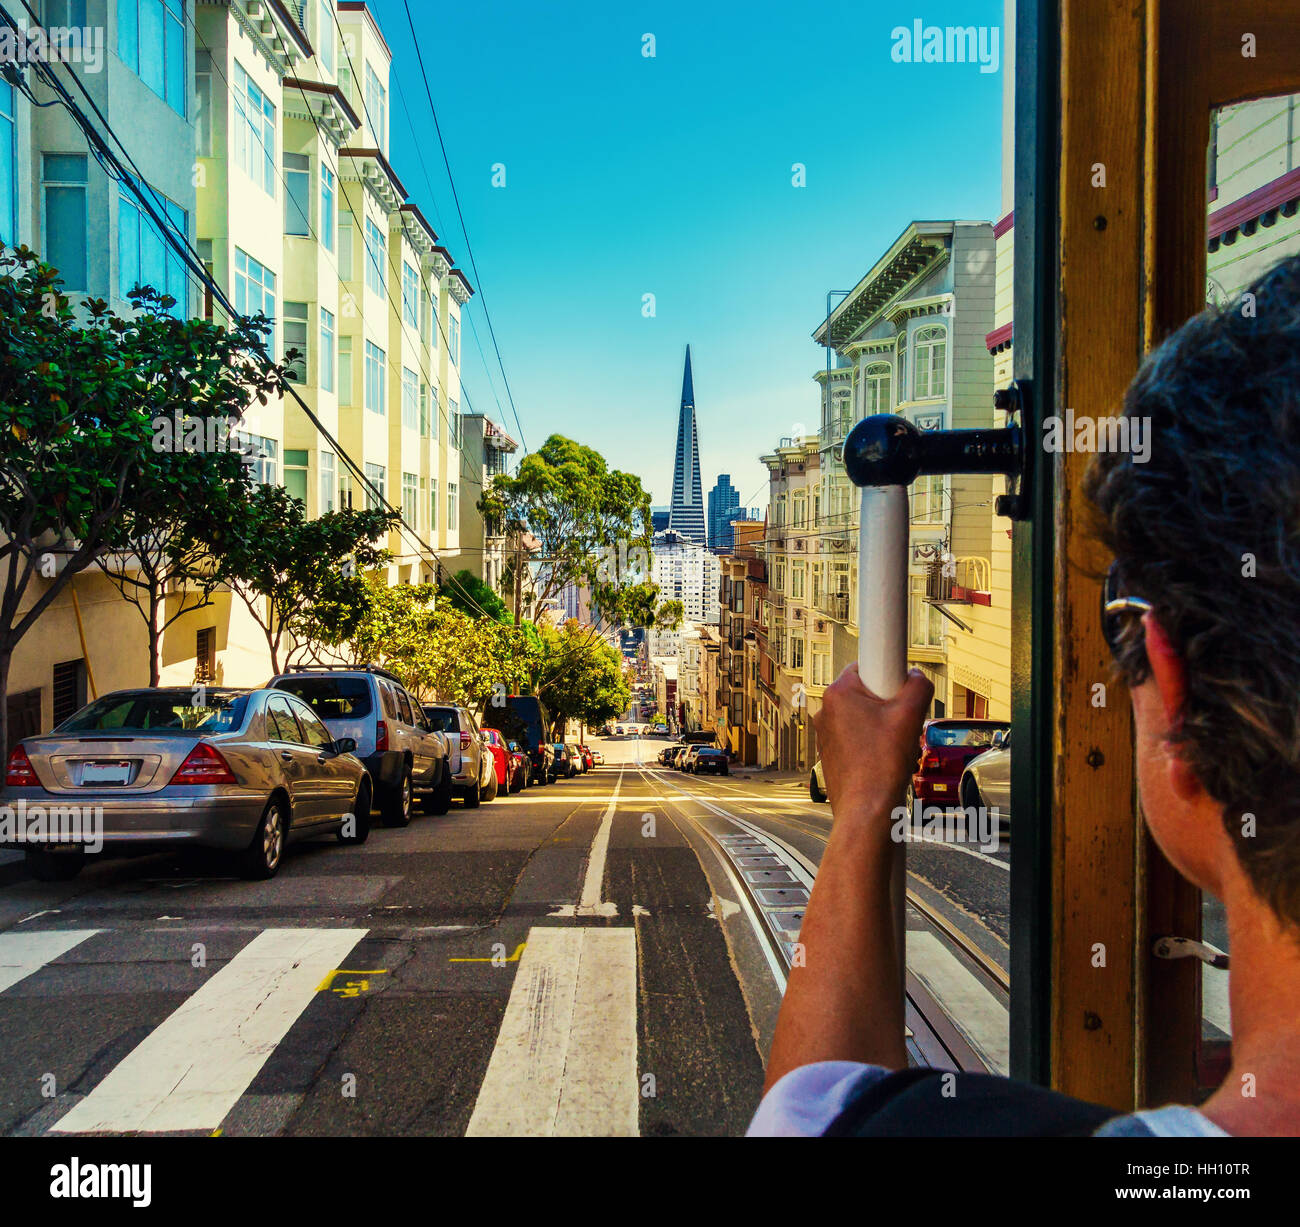 Ride with the cable car in San Francisco. Picture shows a person riding the famous MUNI train on Powell-Mason line down the hill to the bay with the f Stock Photo